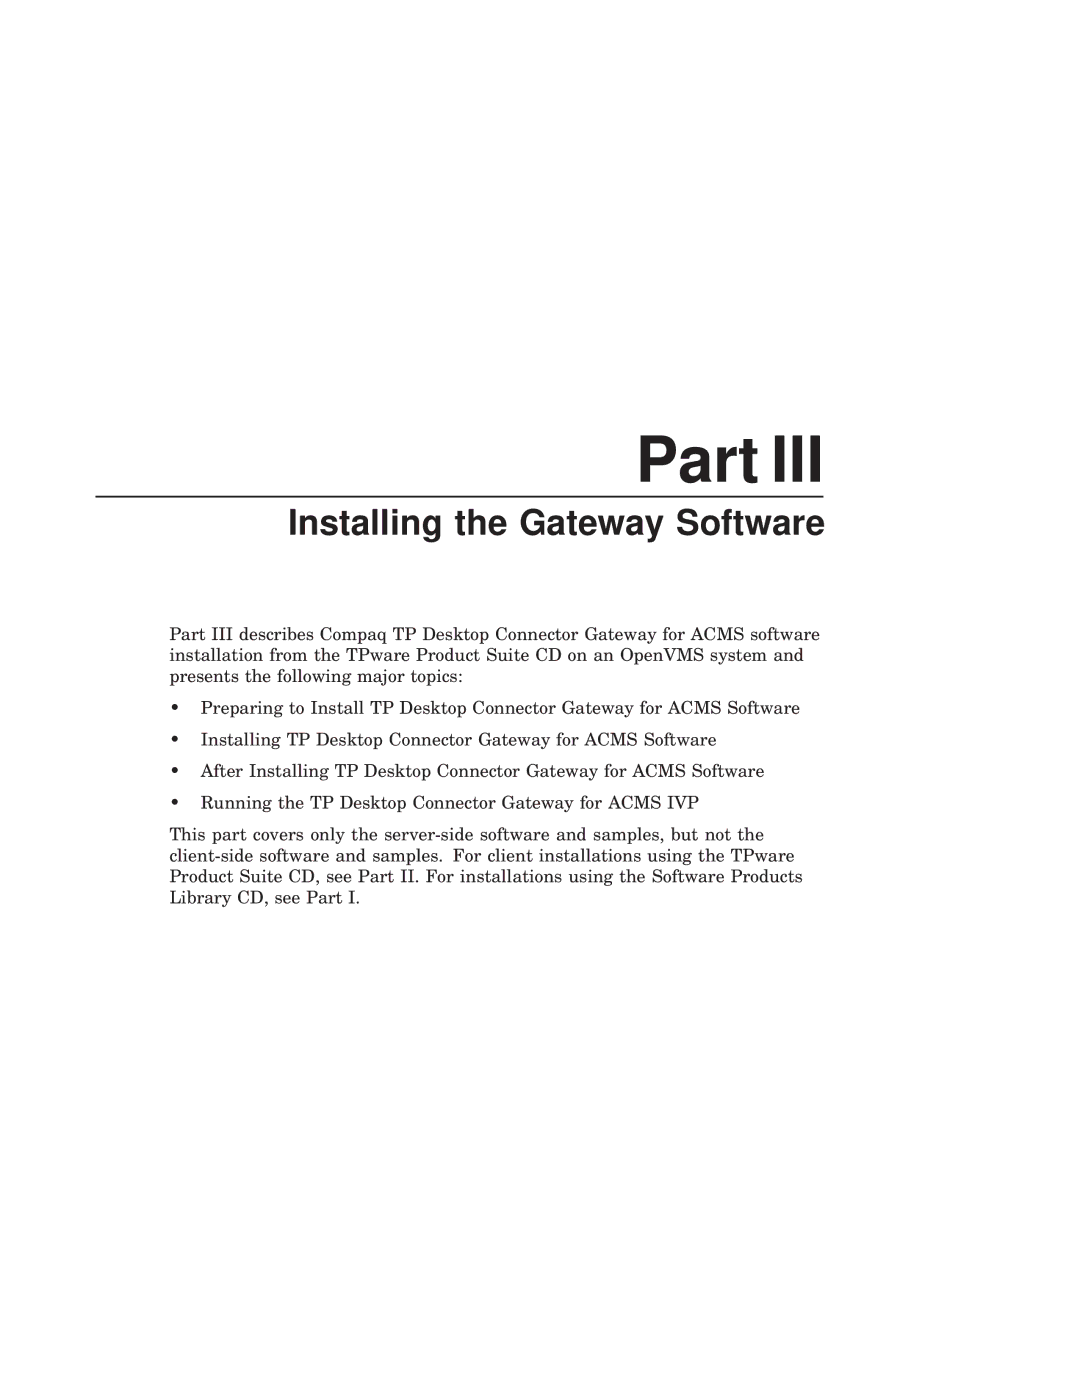 Compaq AAPG9DKTE manual Installing the Gateway Software 